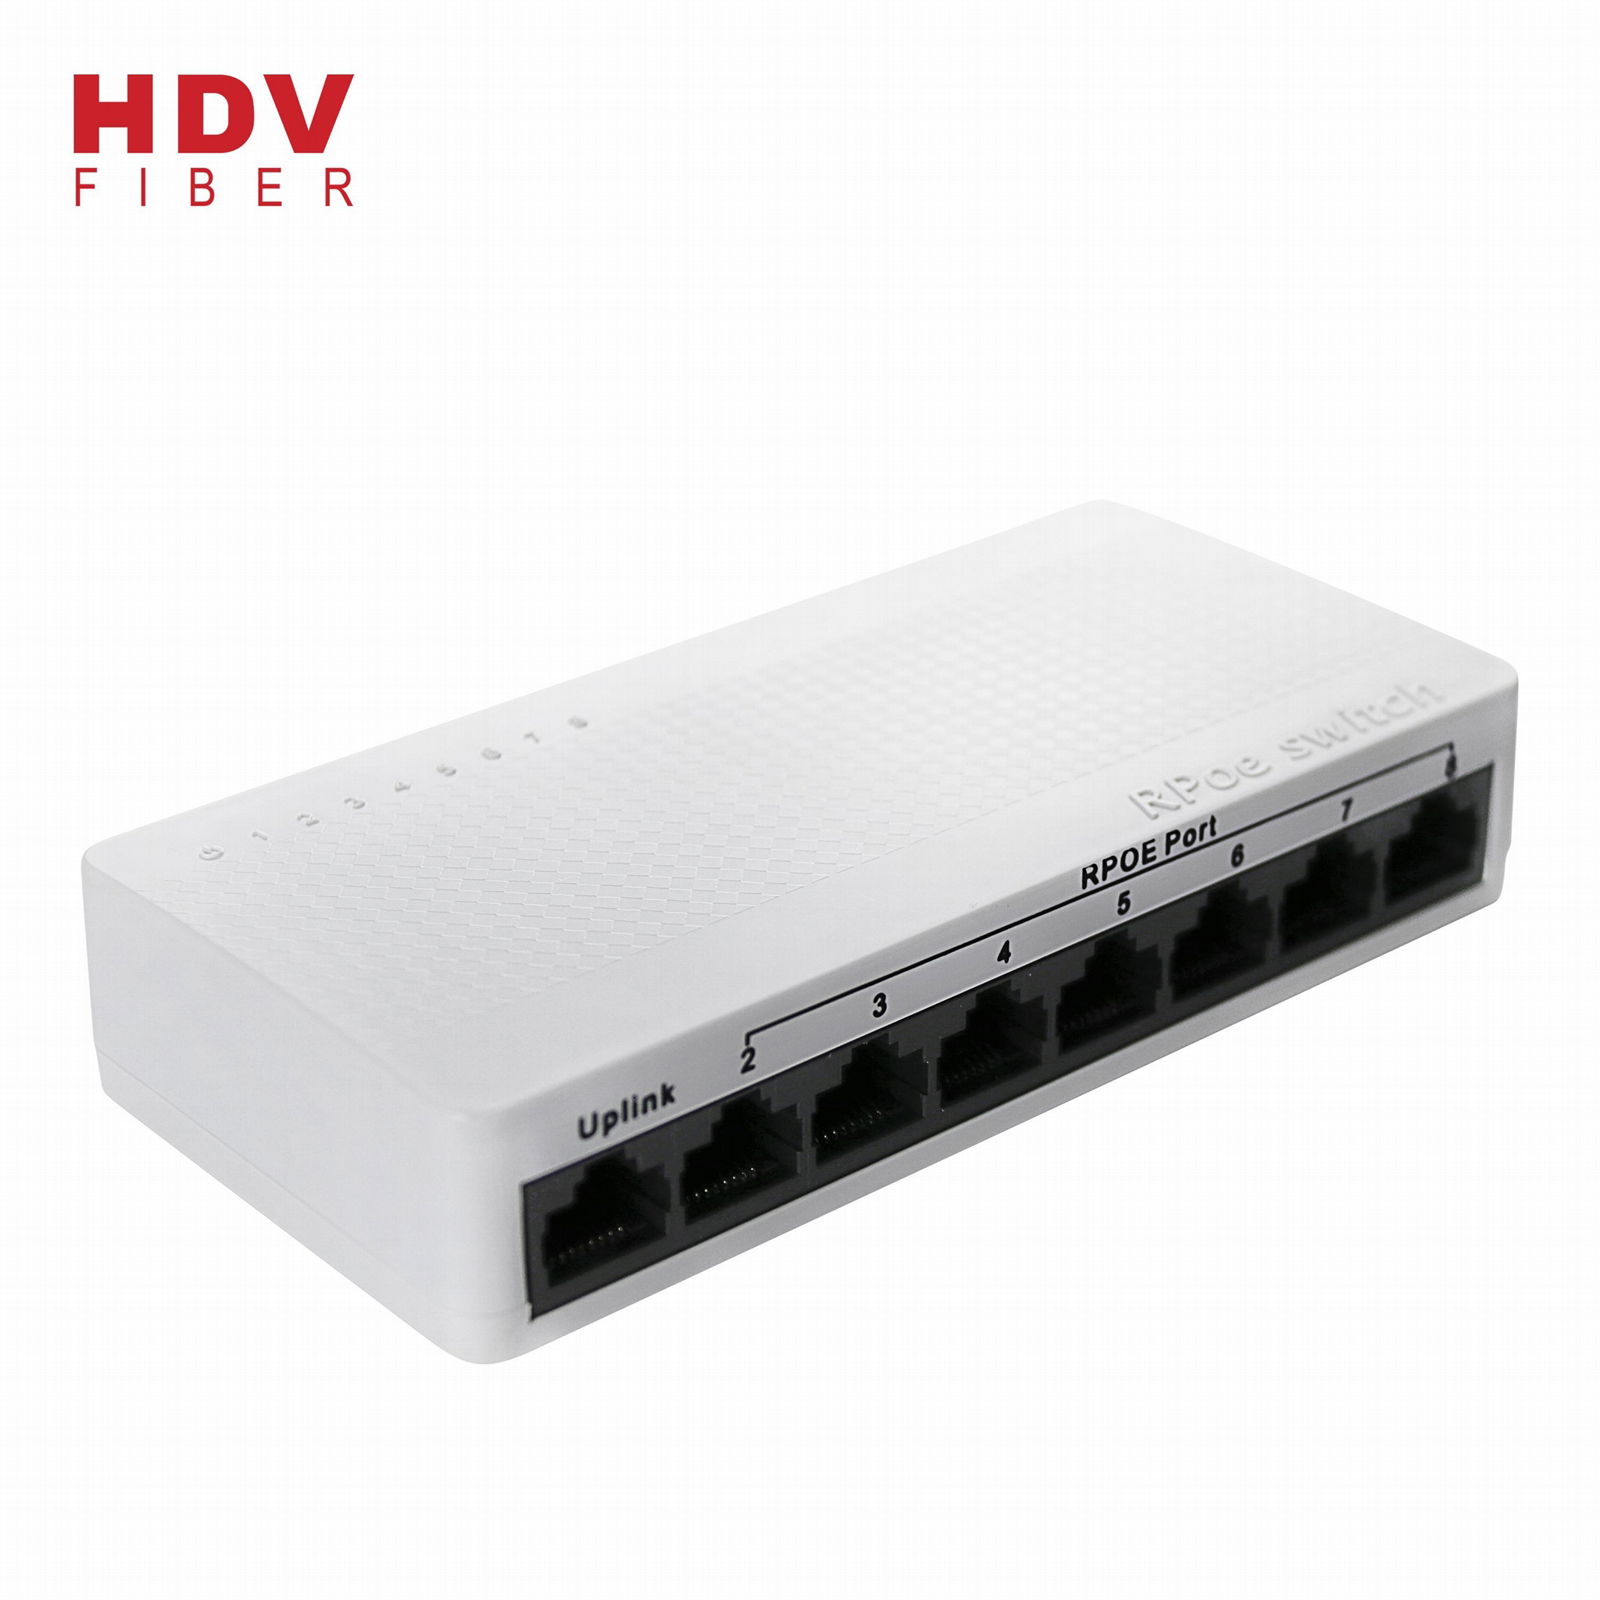 8 Port 10/100Mbps Network Reverse Switch with POE Function  2